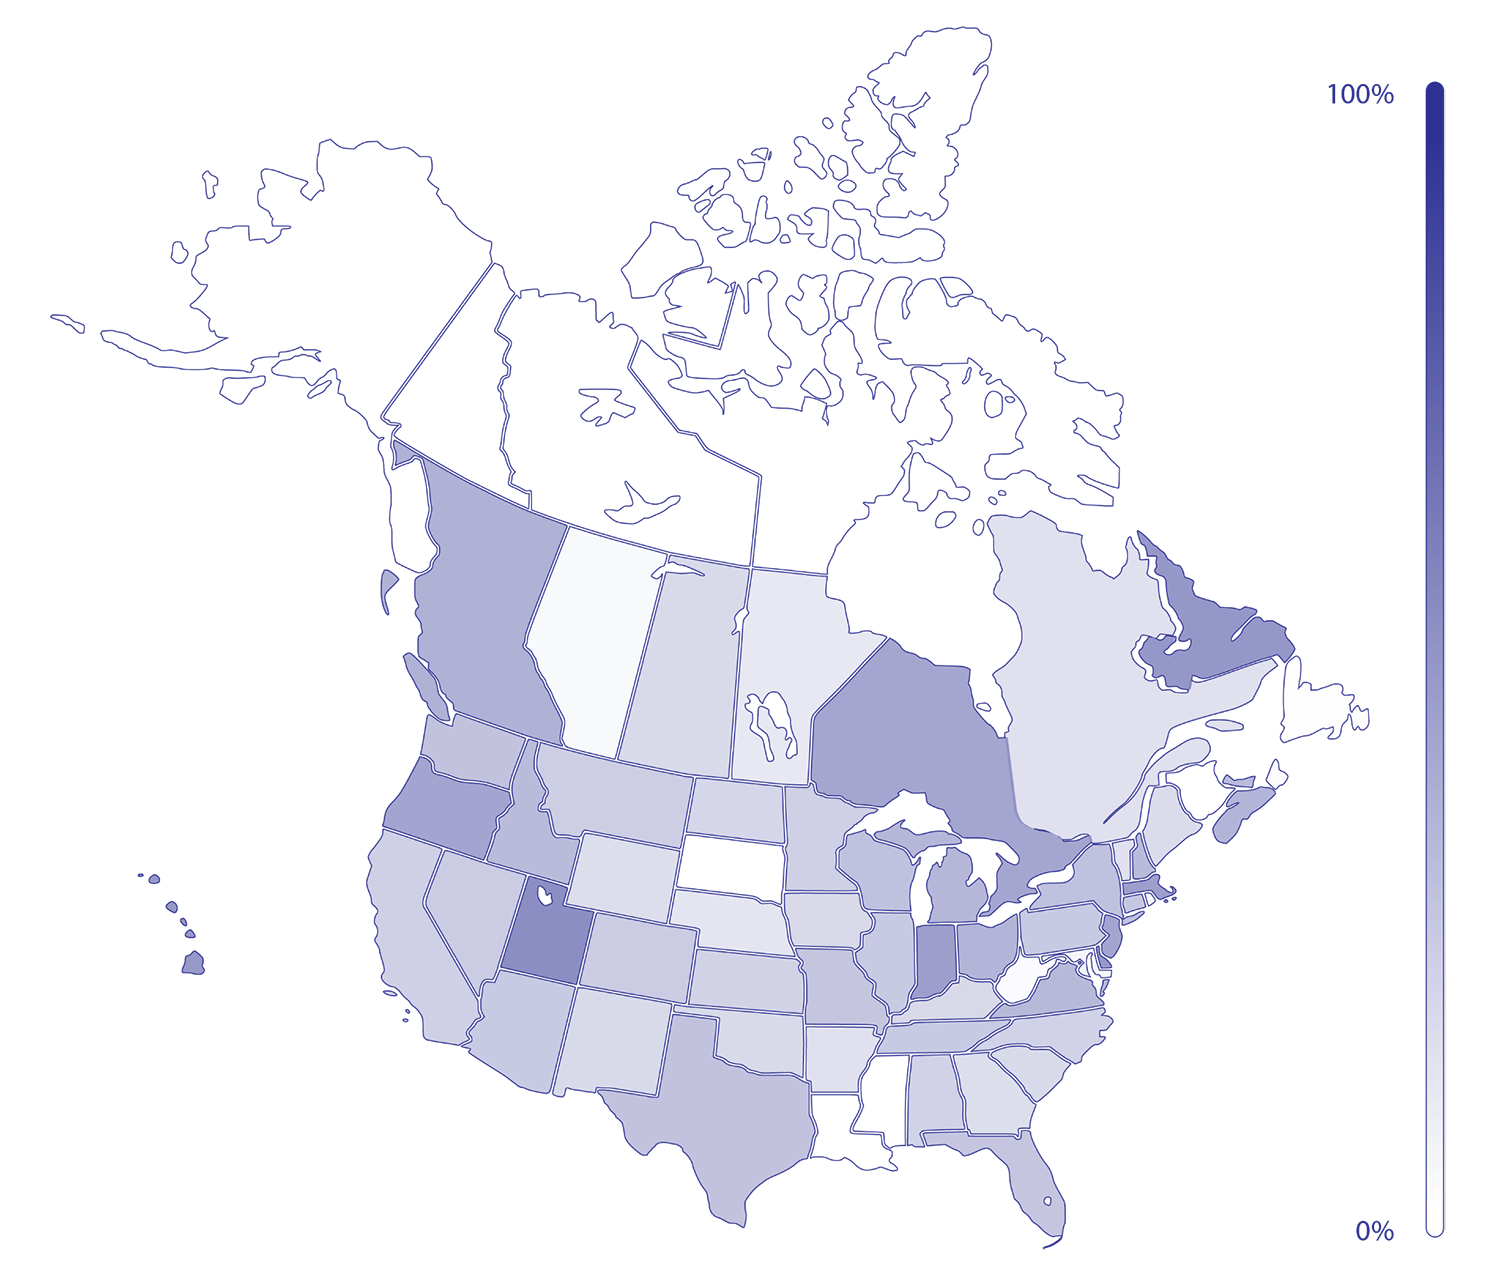 Map showing the United States and Canada, with each state or province shaded to reflect the proportion of institutions whose websites mention ChatGPT.